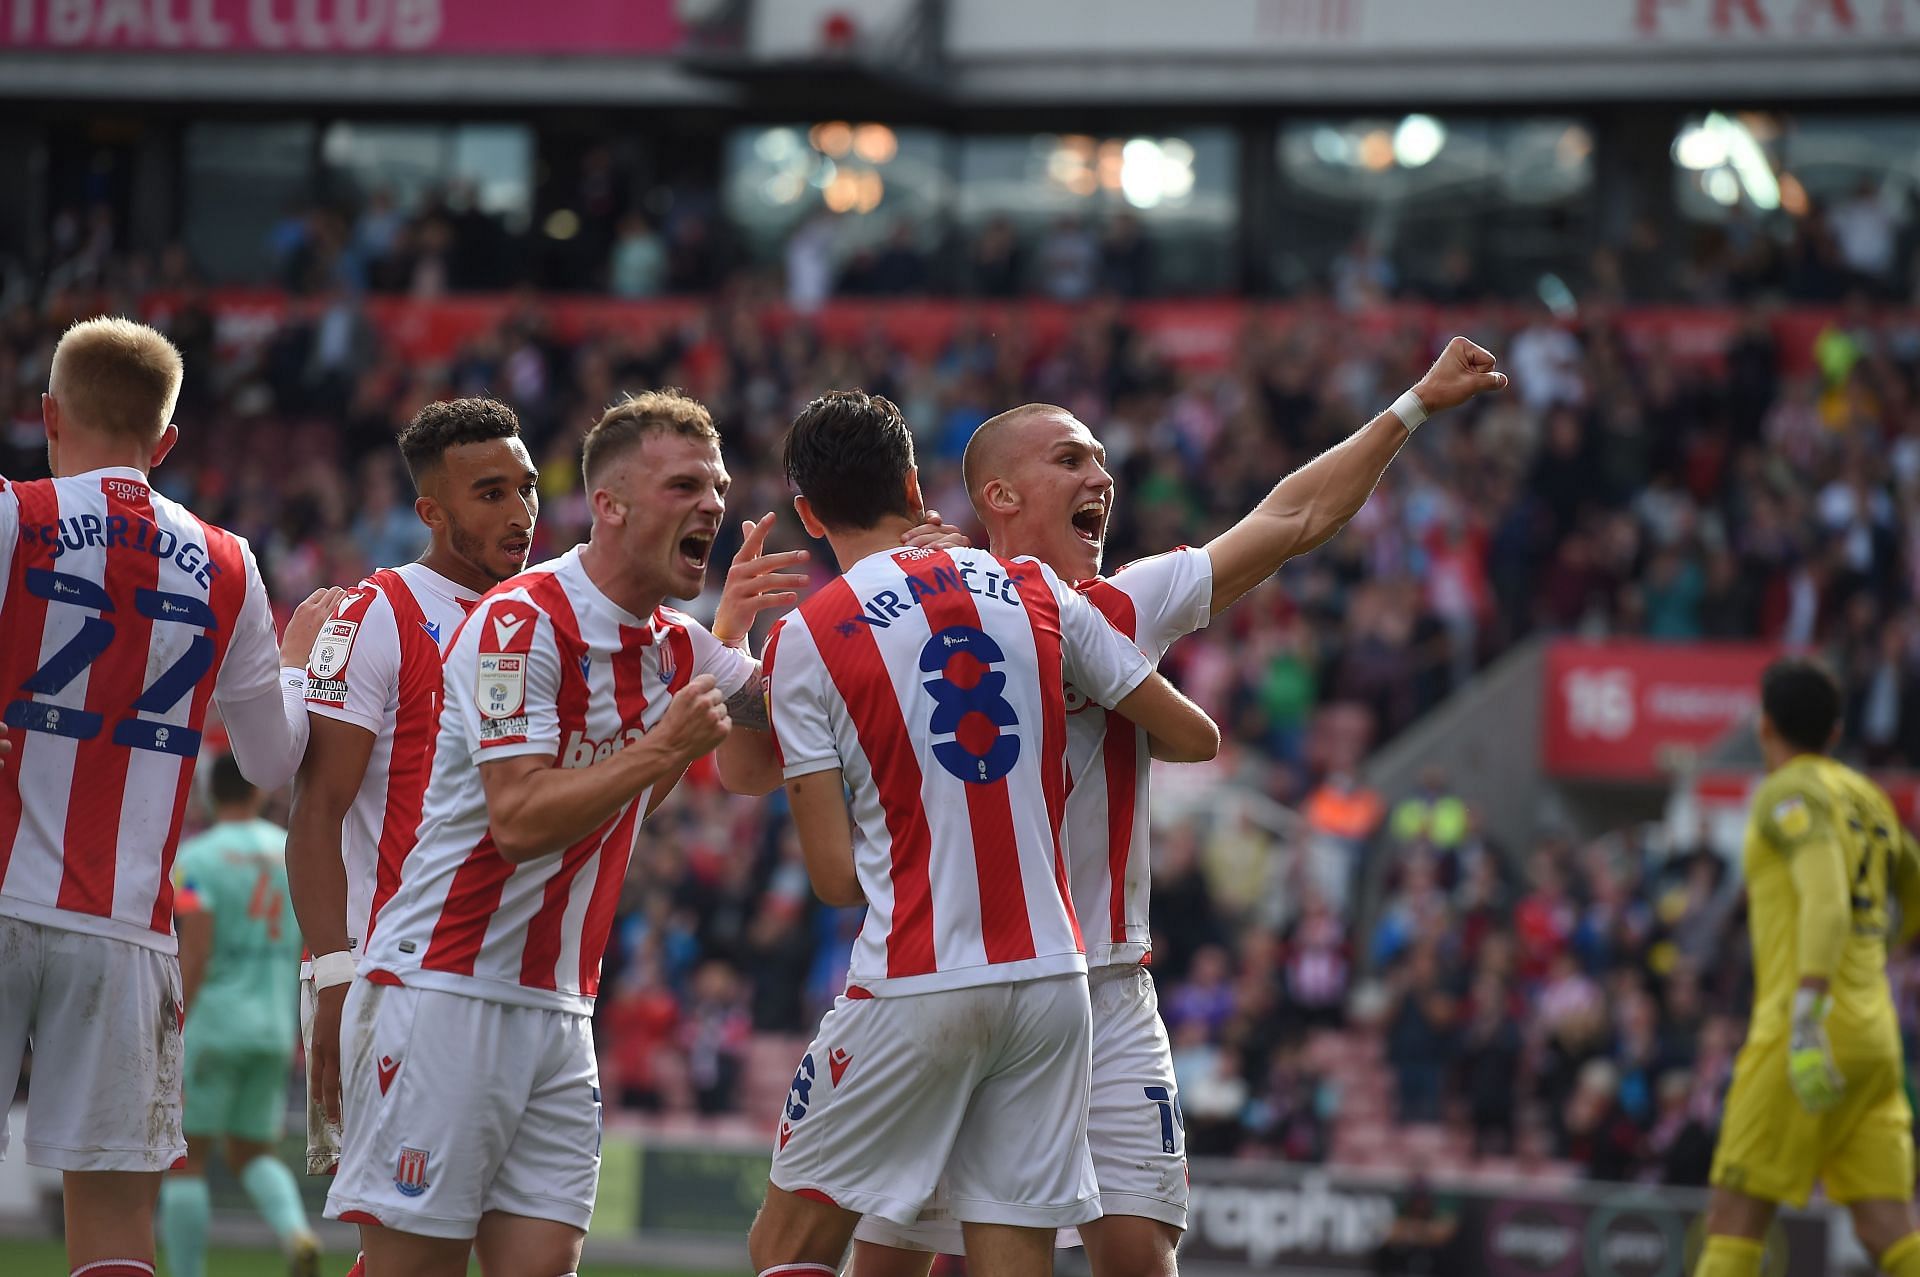 Stoke City will face Luton Town on Saturday